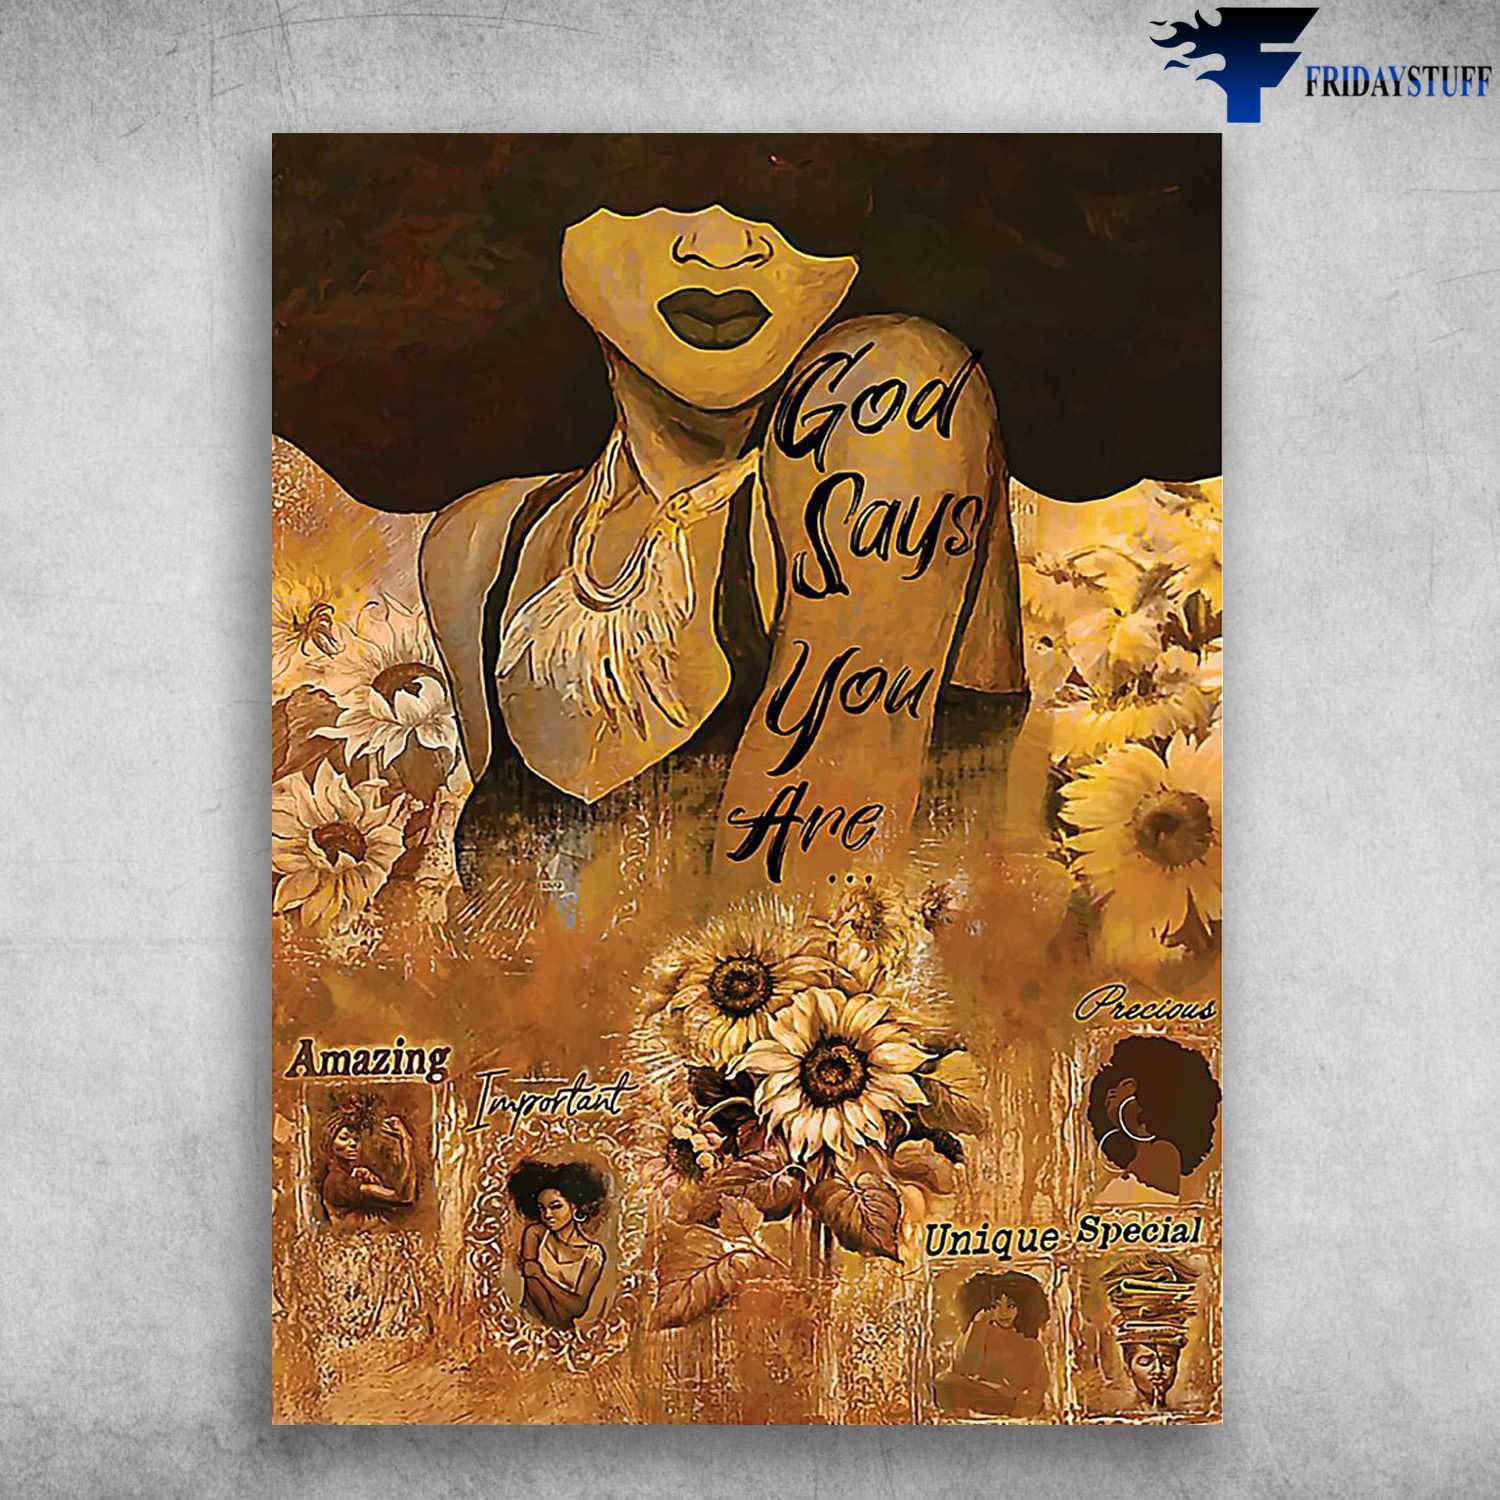 Lady Girl, Black Girl Poster, God Says You Are, Amazing, Important, Unique, Special, Precious